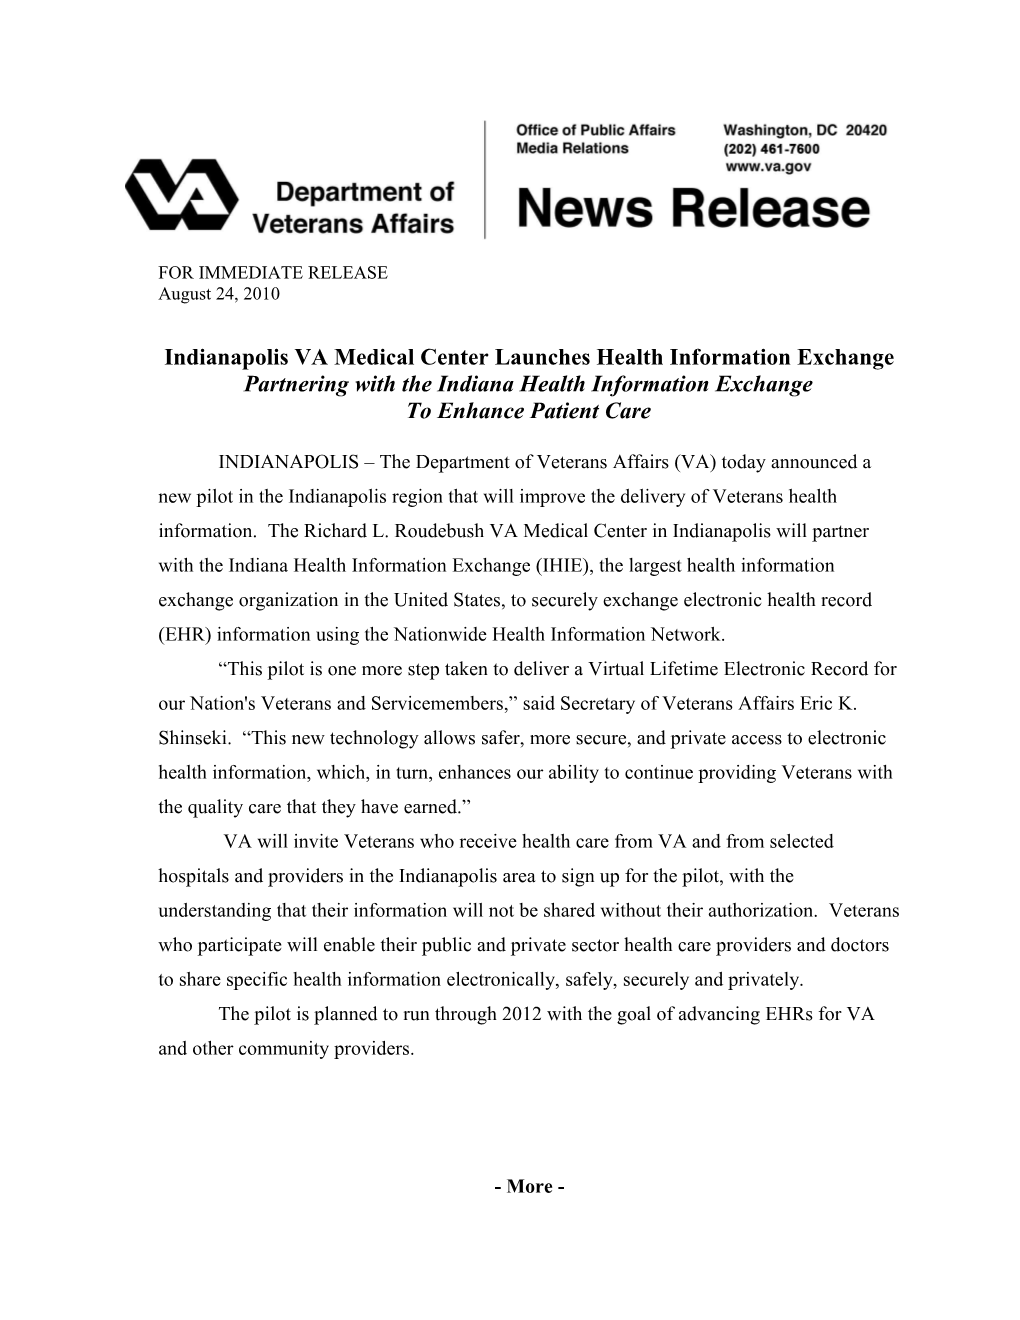 Indianapolis VA Medical Center Launches Health Information Exchange